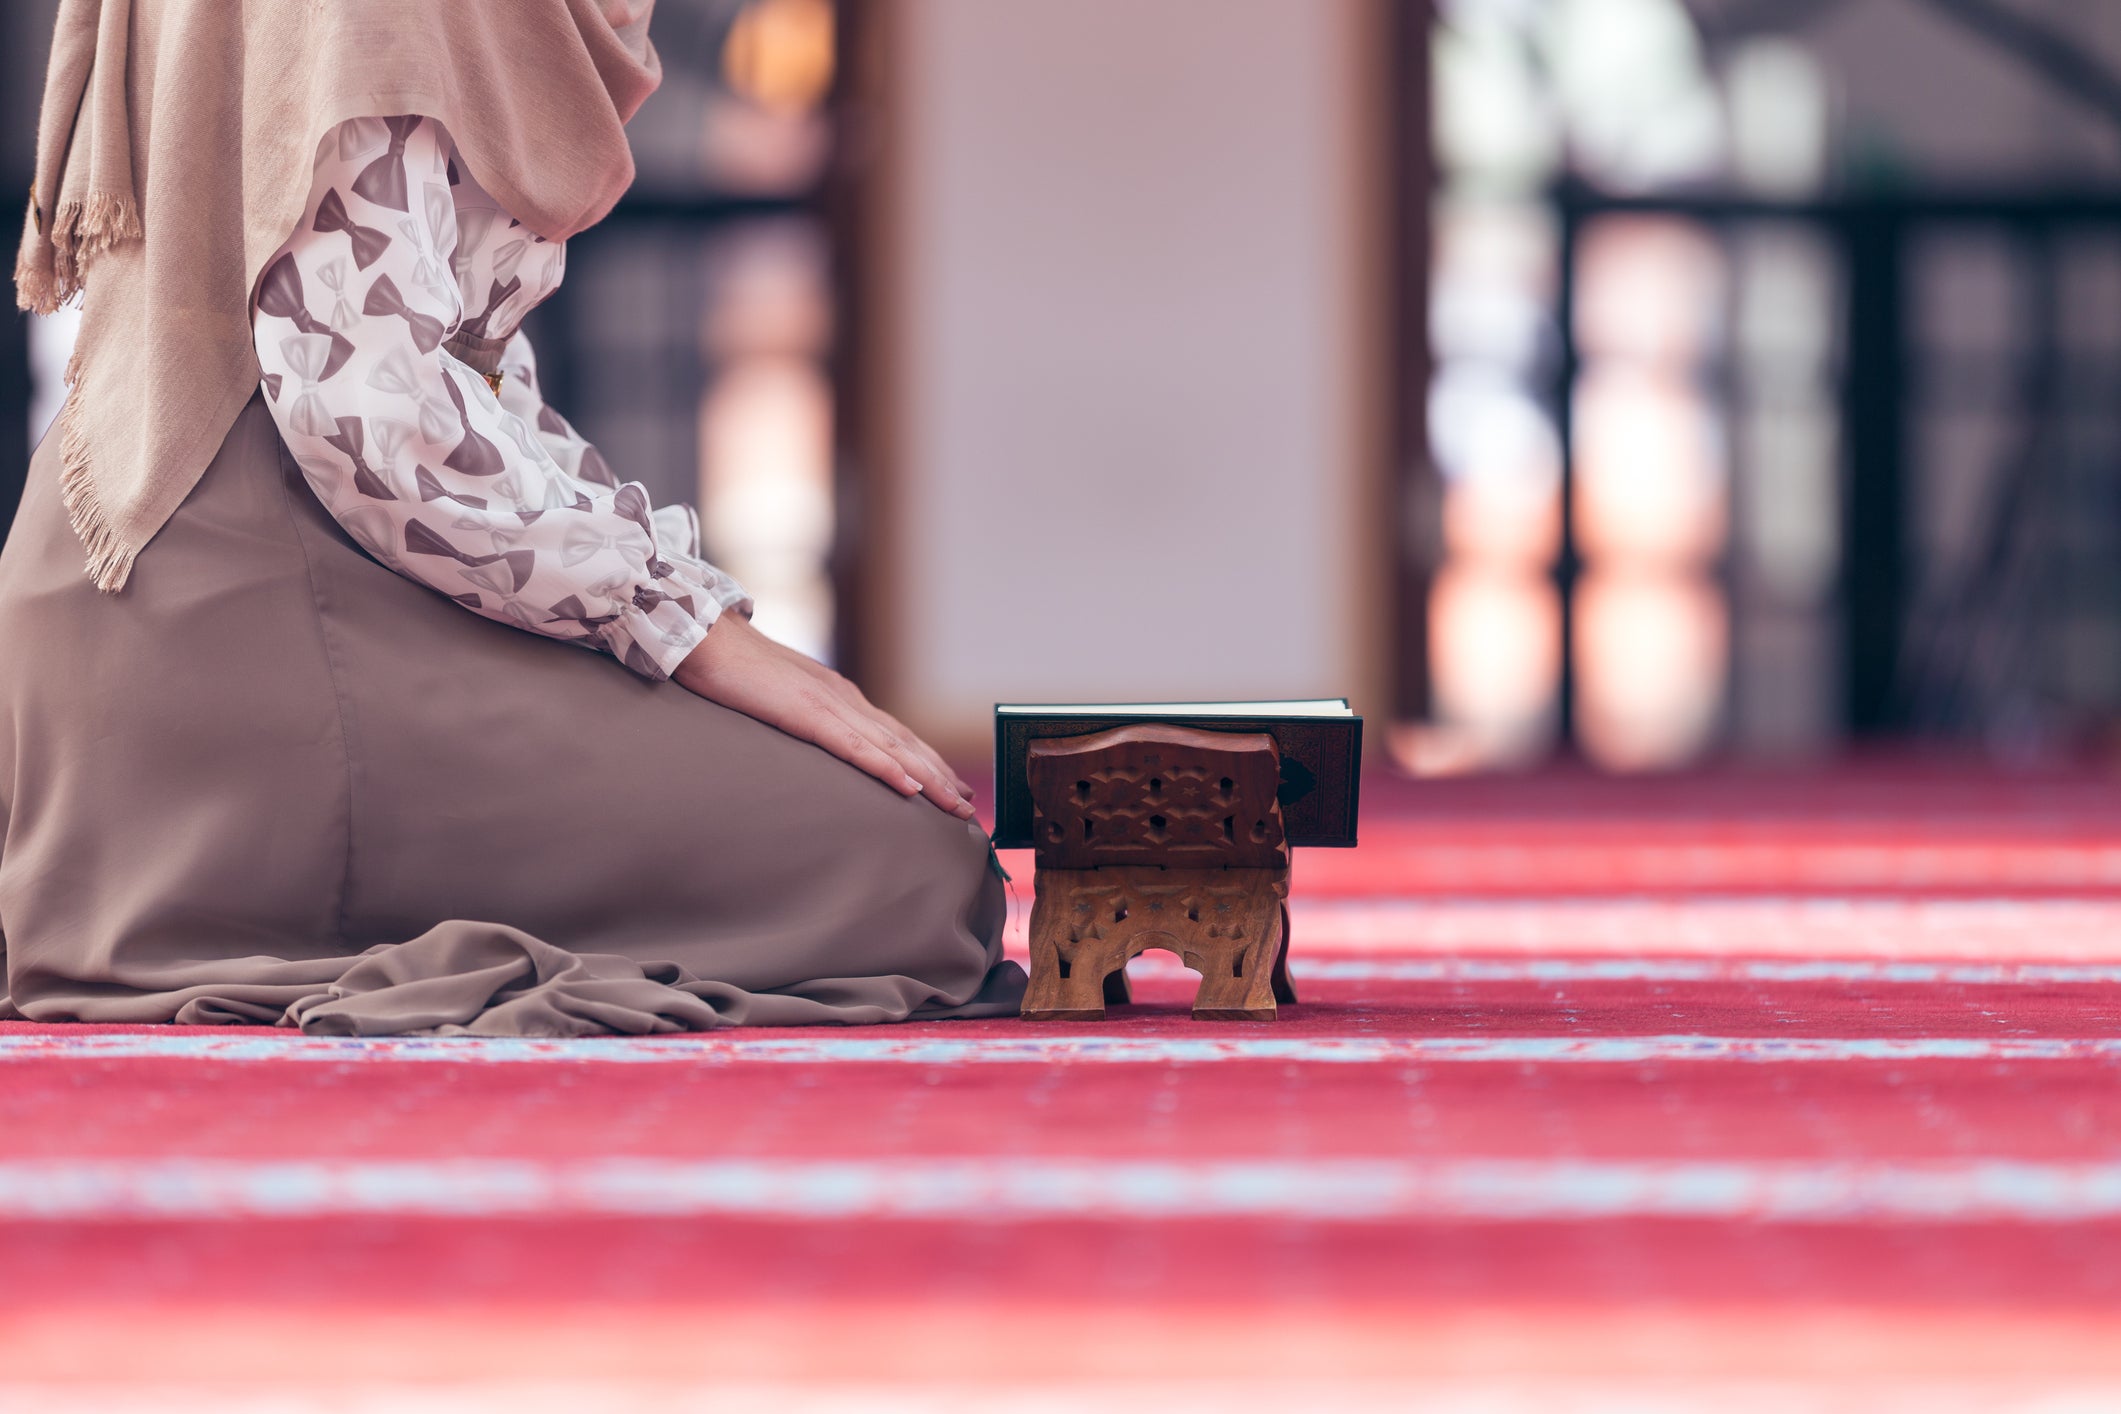 75 per cent of people think mosques must change to become more welcoming for women